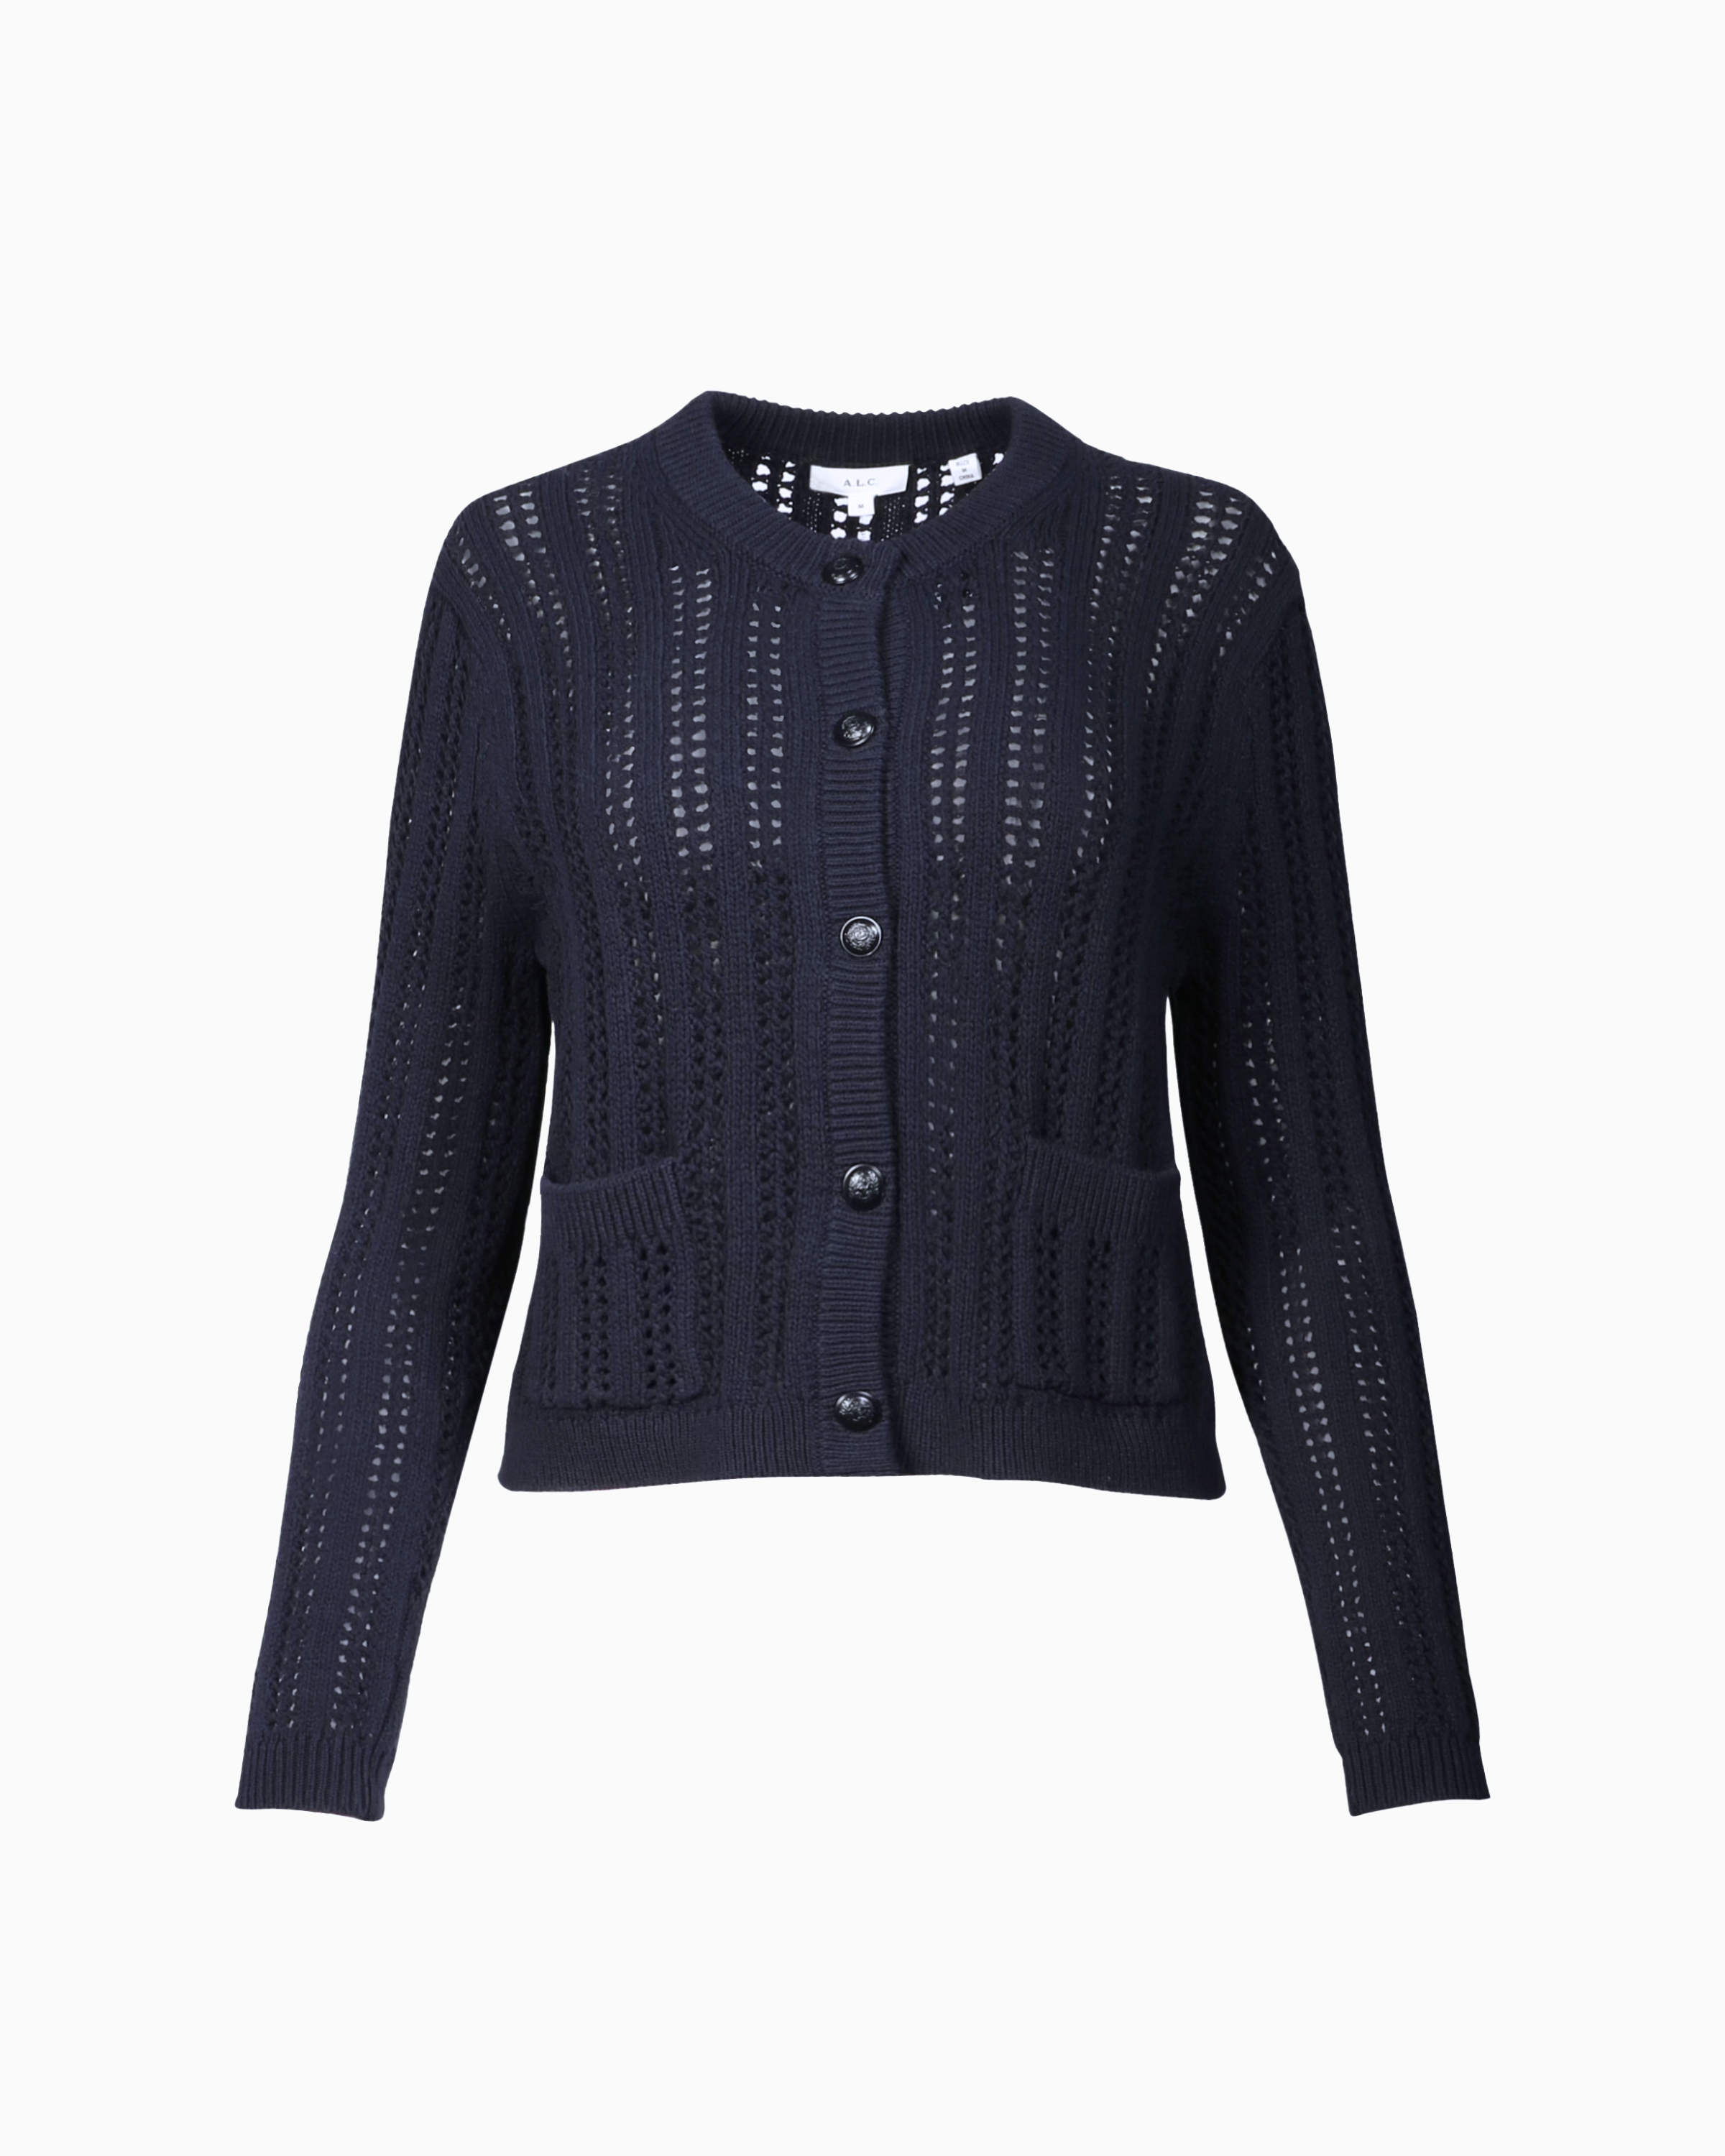 A.L.C. Tilly Cardigan in Navy